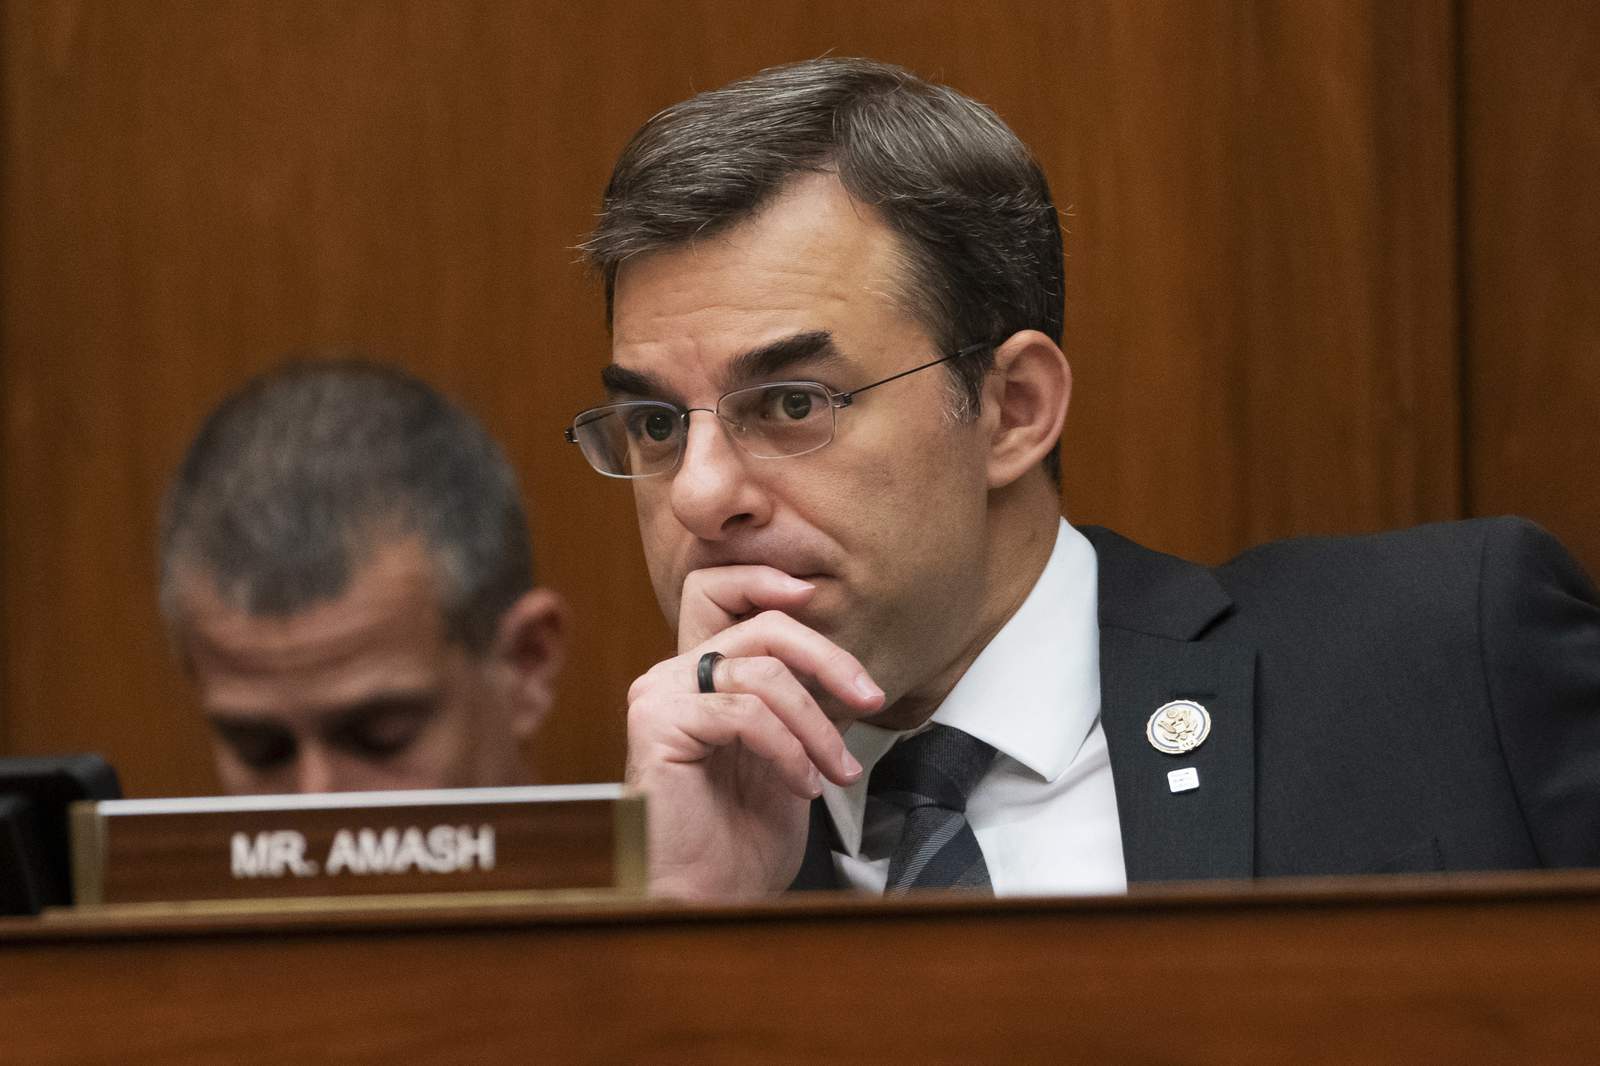 Michigan congressman Justin Amash drops out of presidential race as third-party candidate